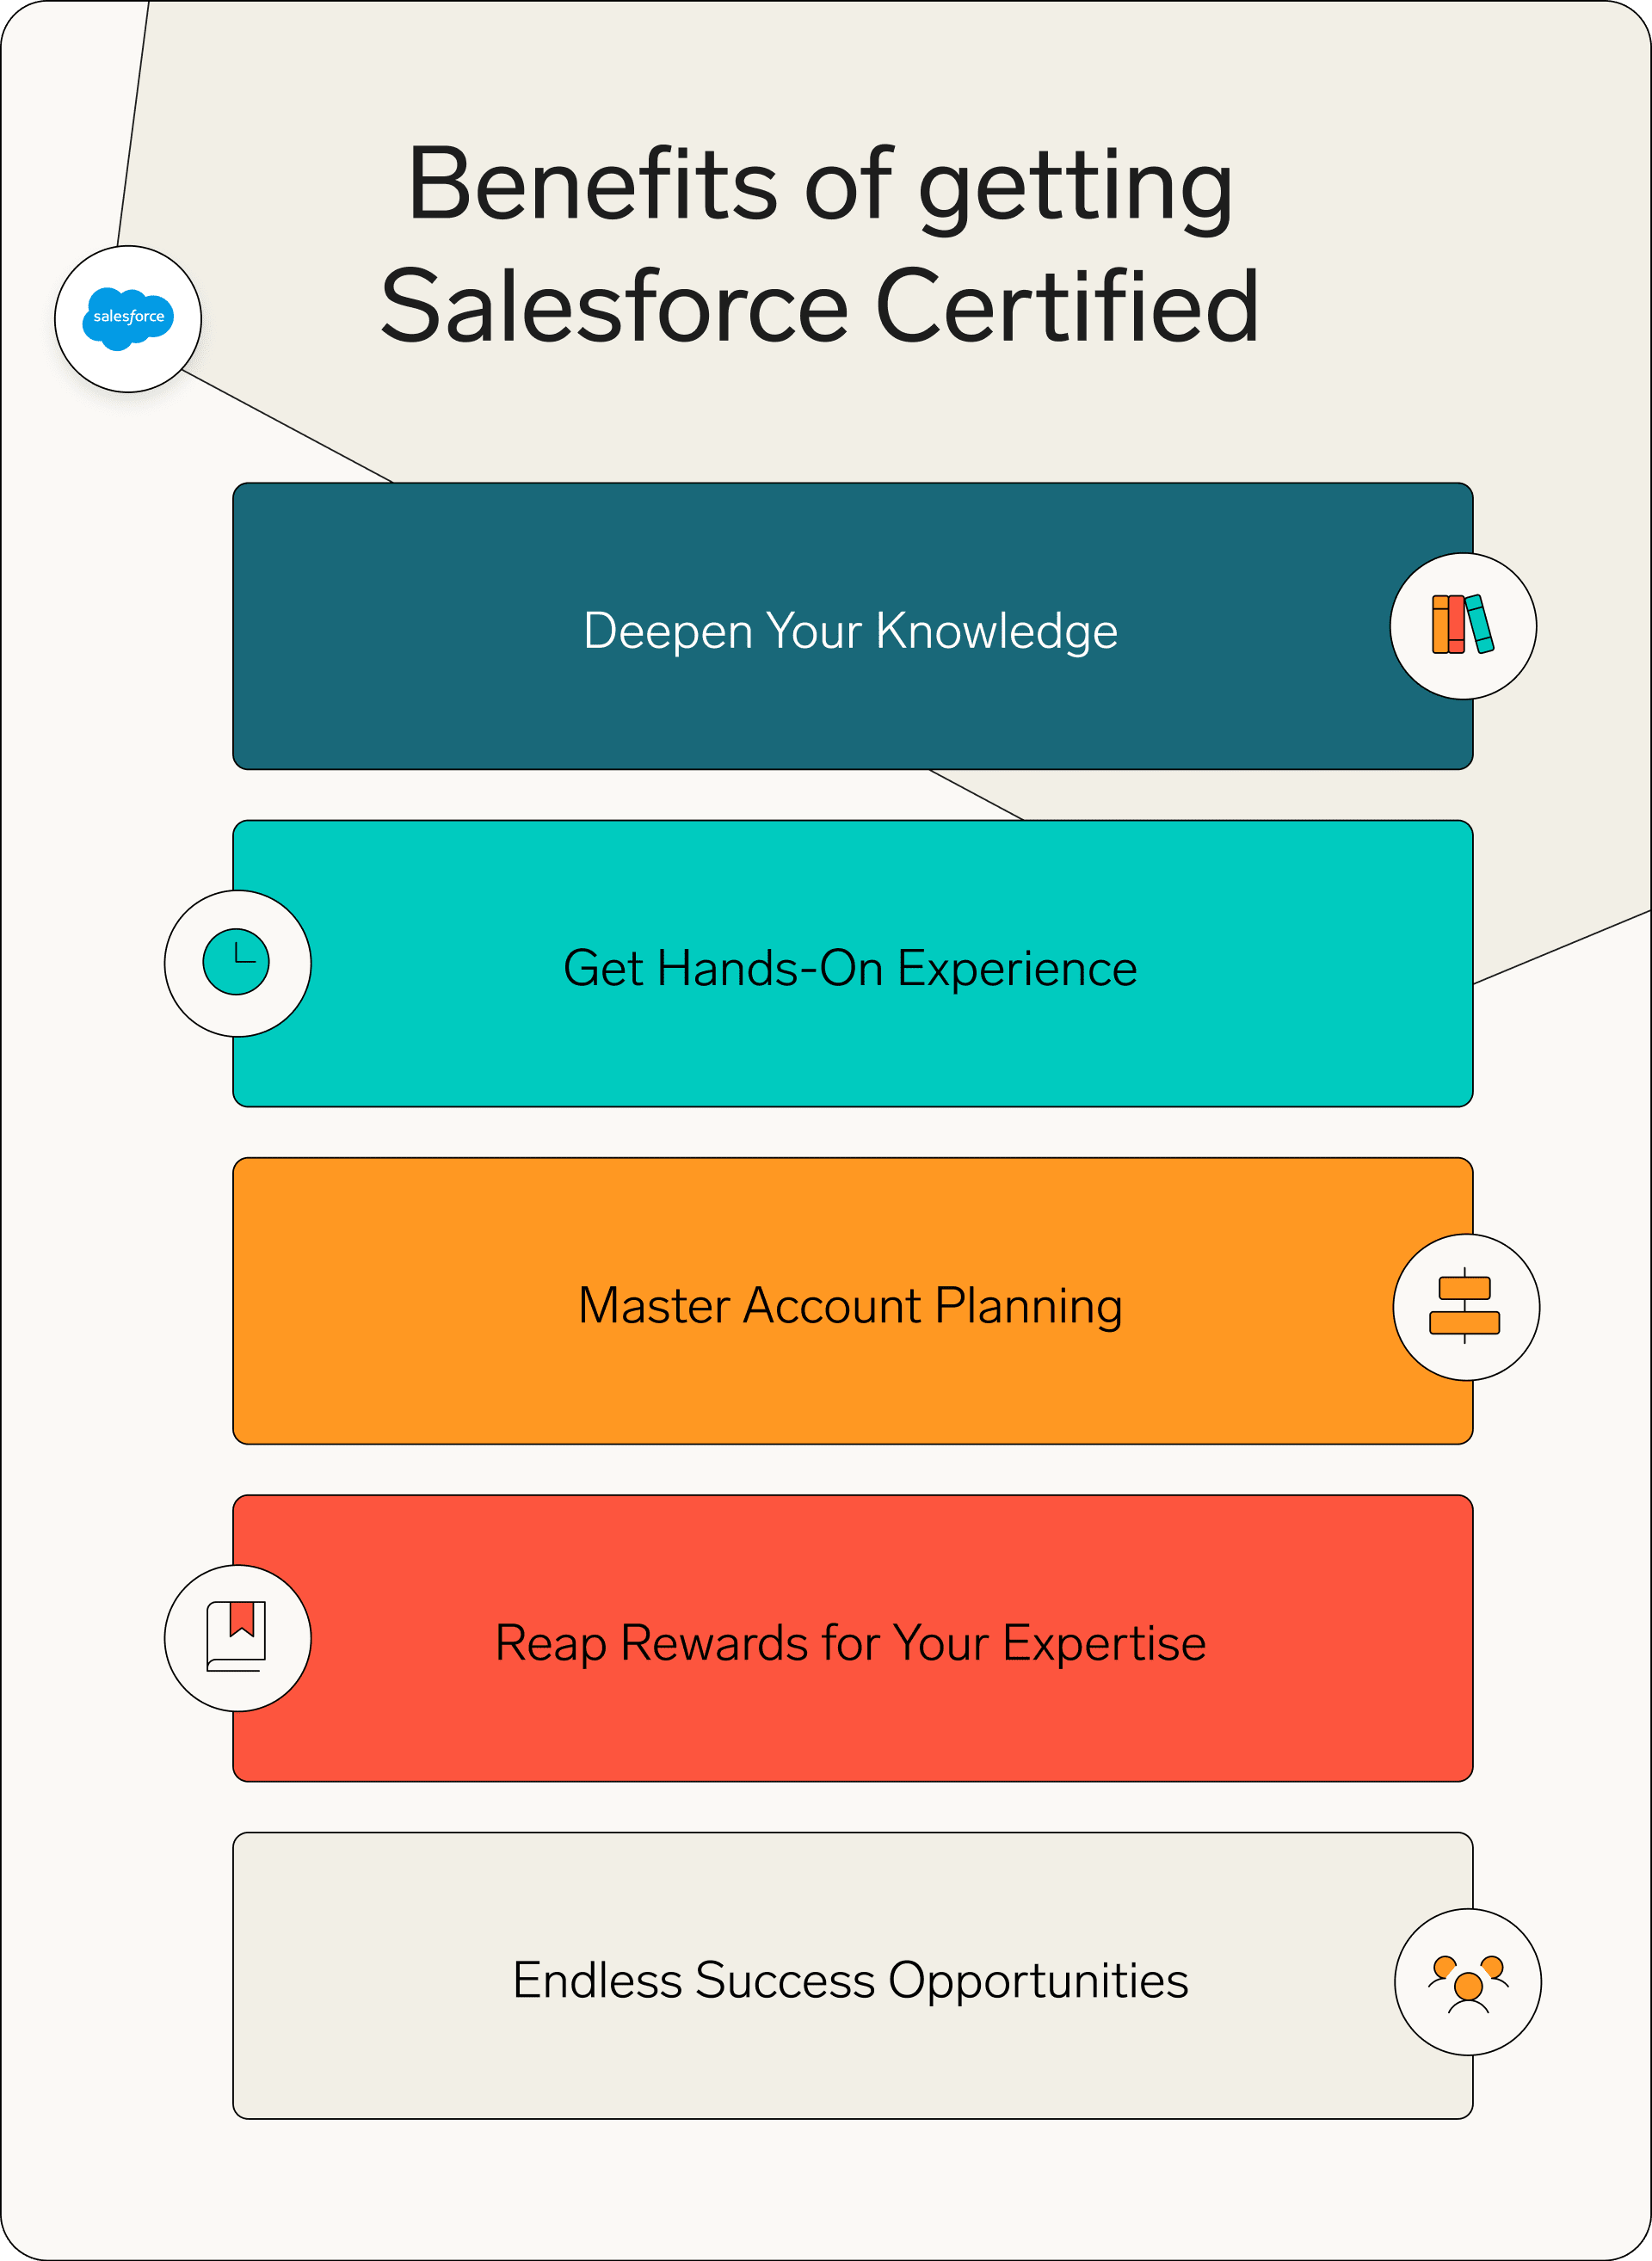 The benefits of getting Salesforce certified